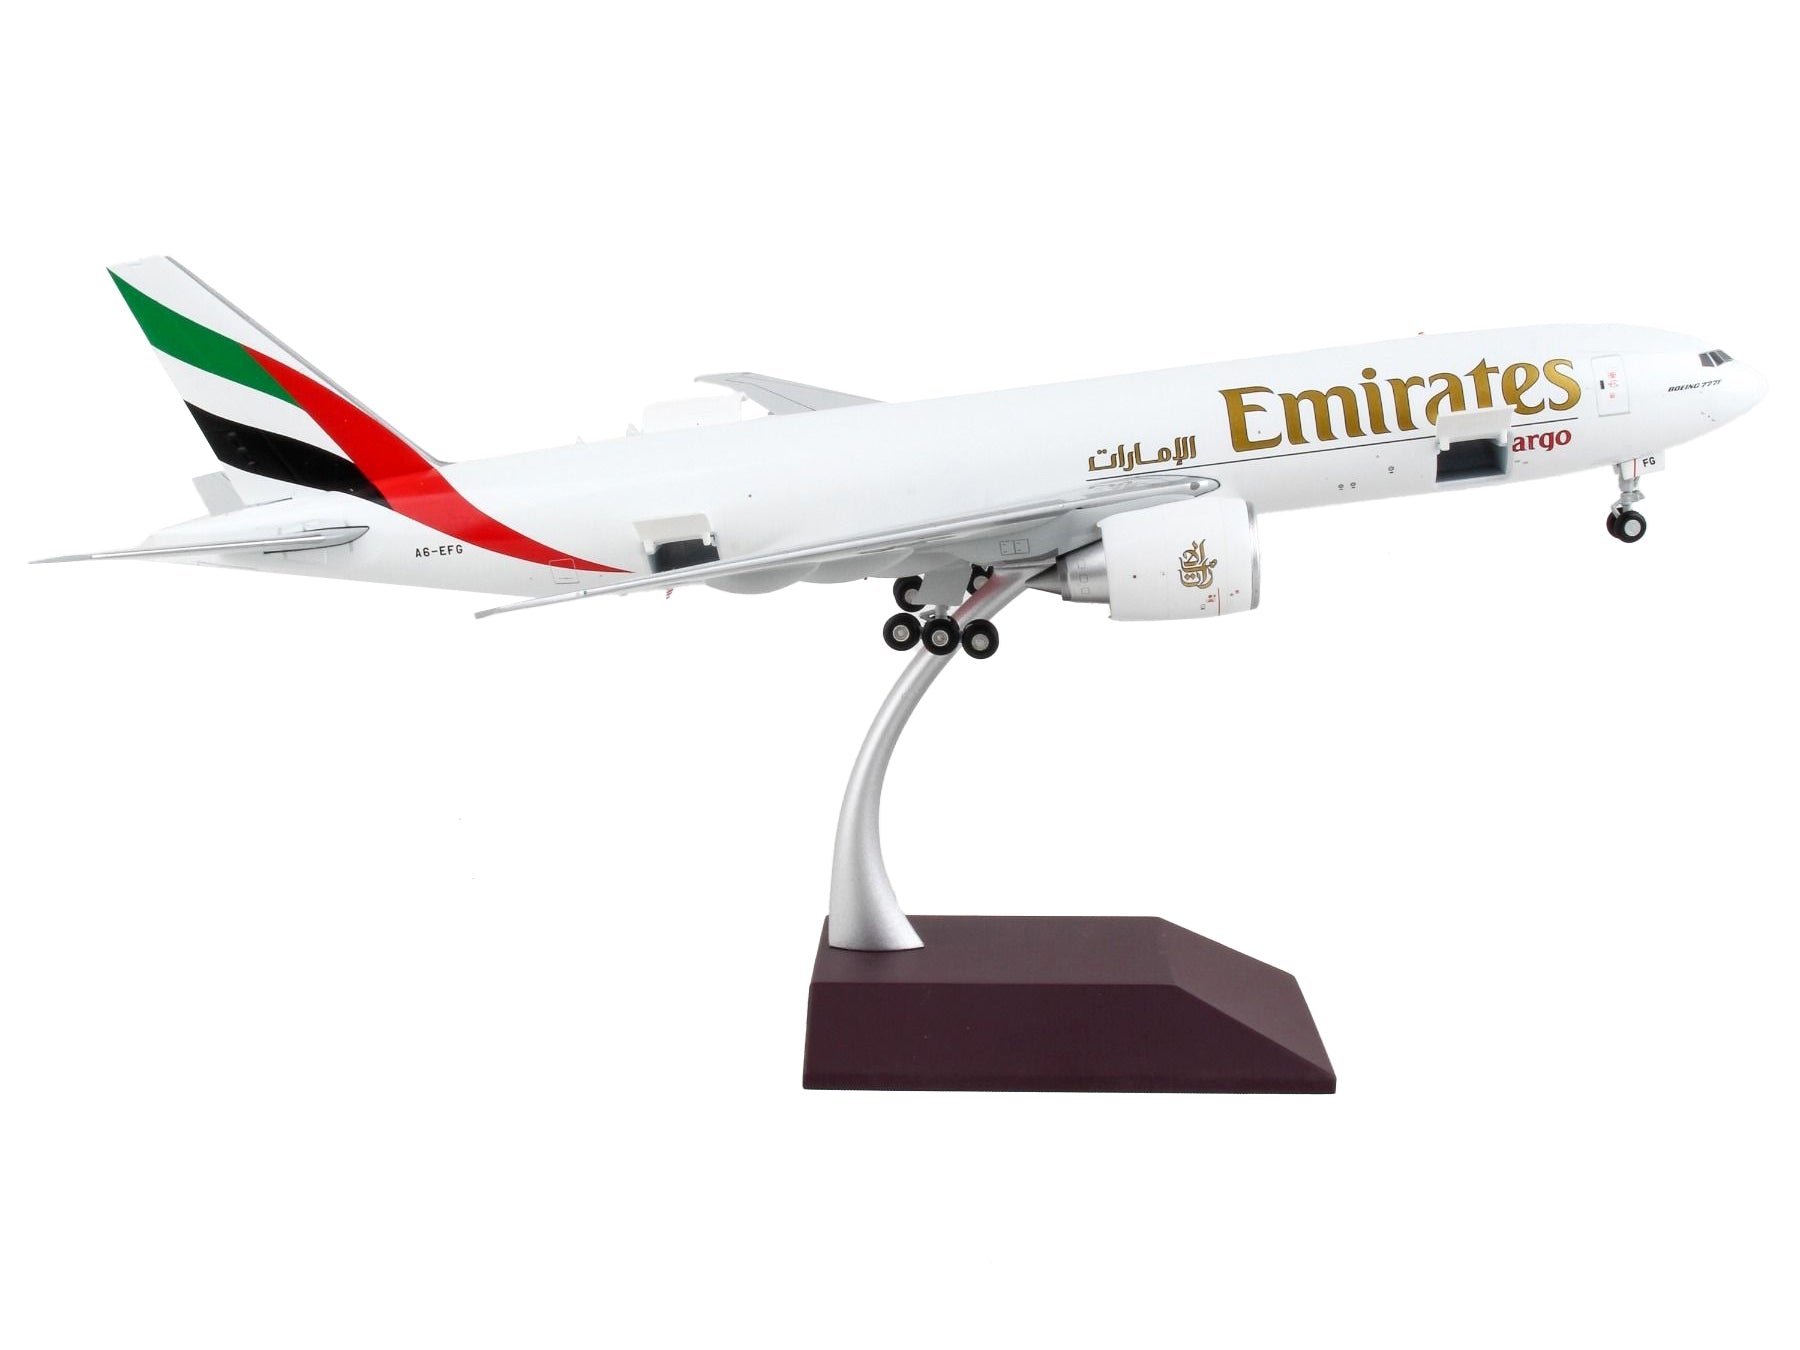 Boeing 777F Commercial Aircraft "Emirates Airlines - SkyCargo" White with Striped Tail